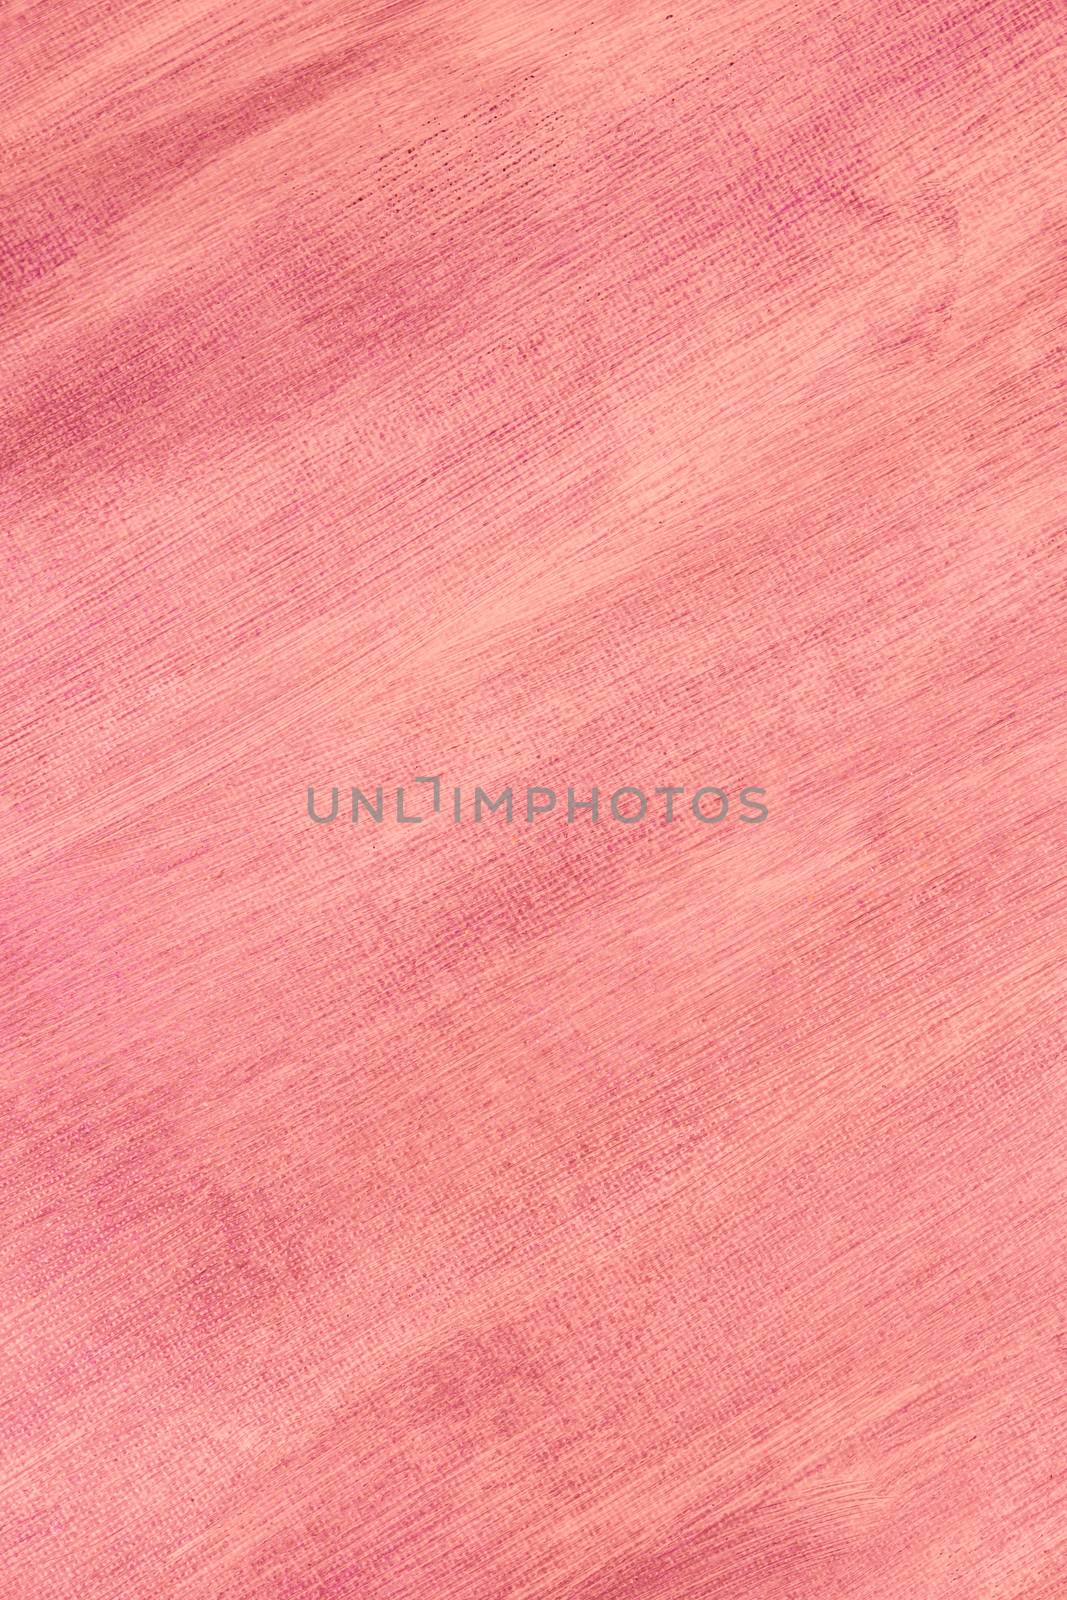 Painted pink canvas background texture.  by AnaMarques